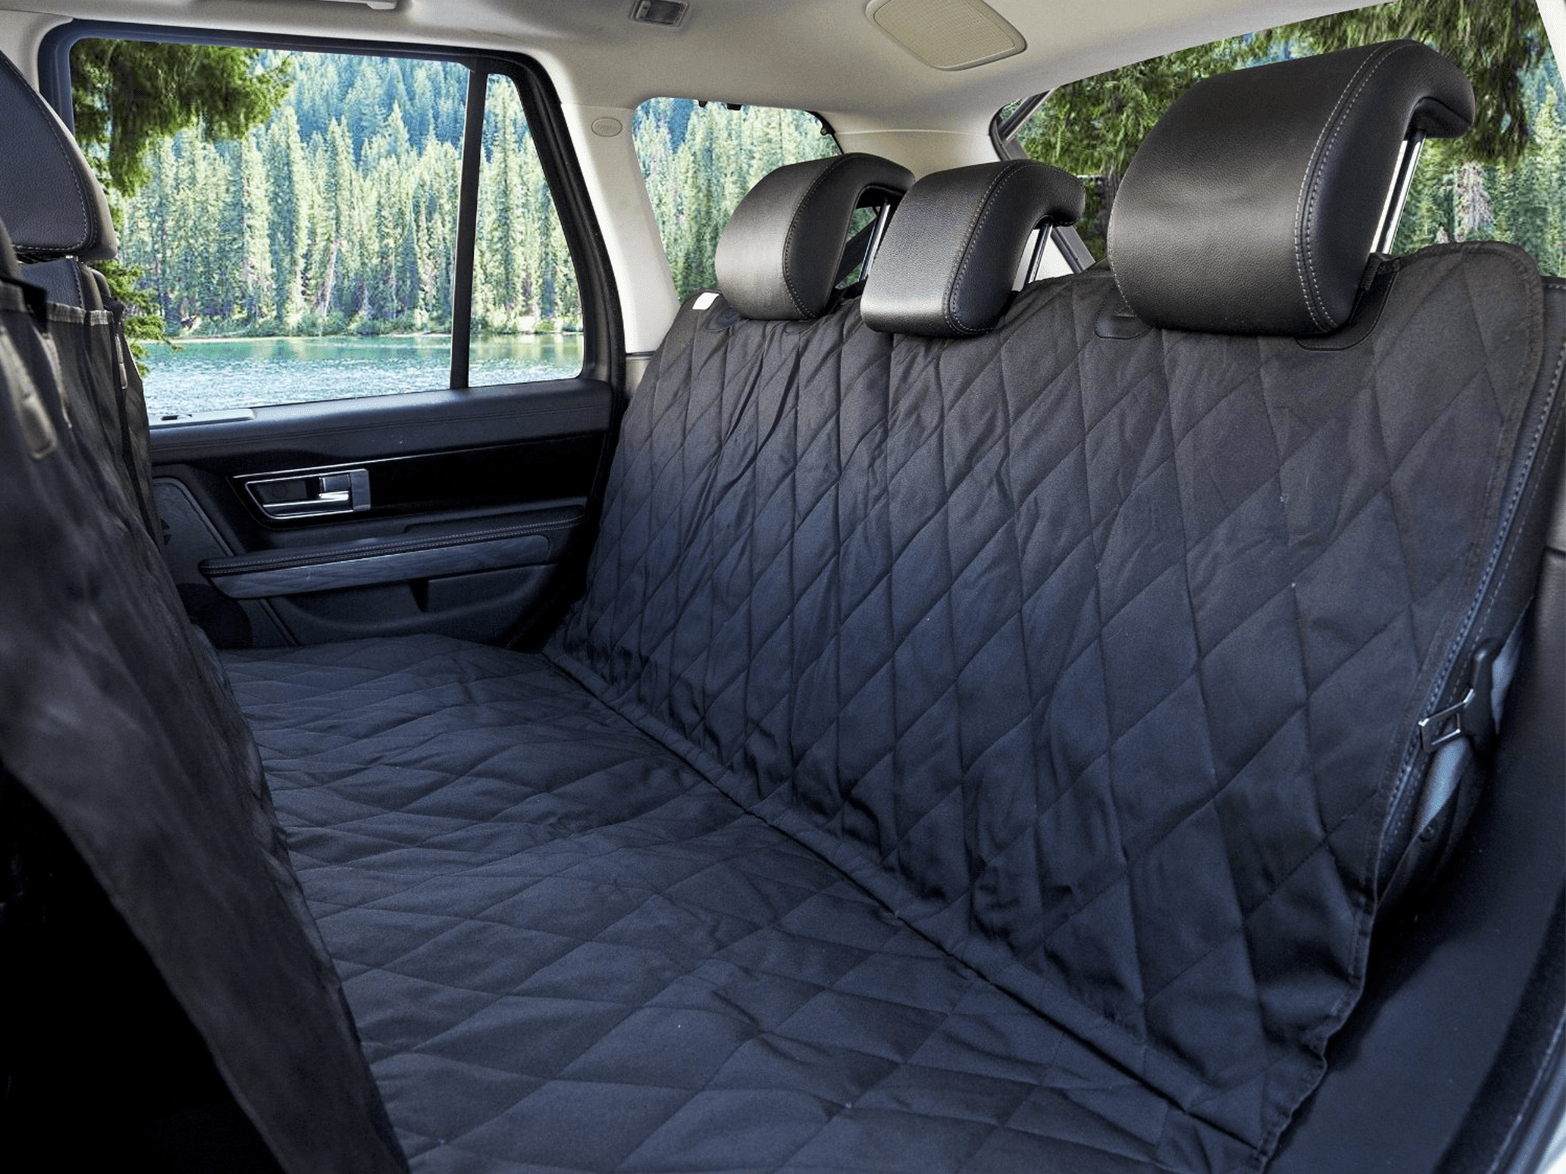 Premium Dog Rear Car Seat Cover – Perfect Paw Store